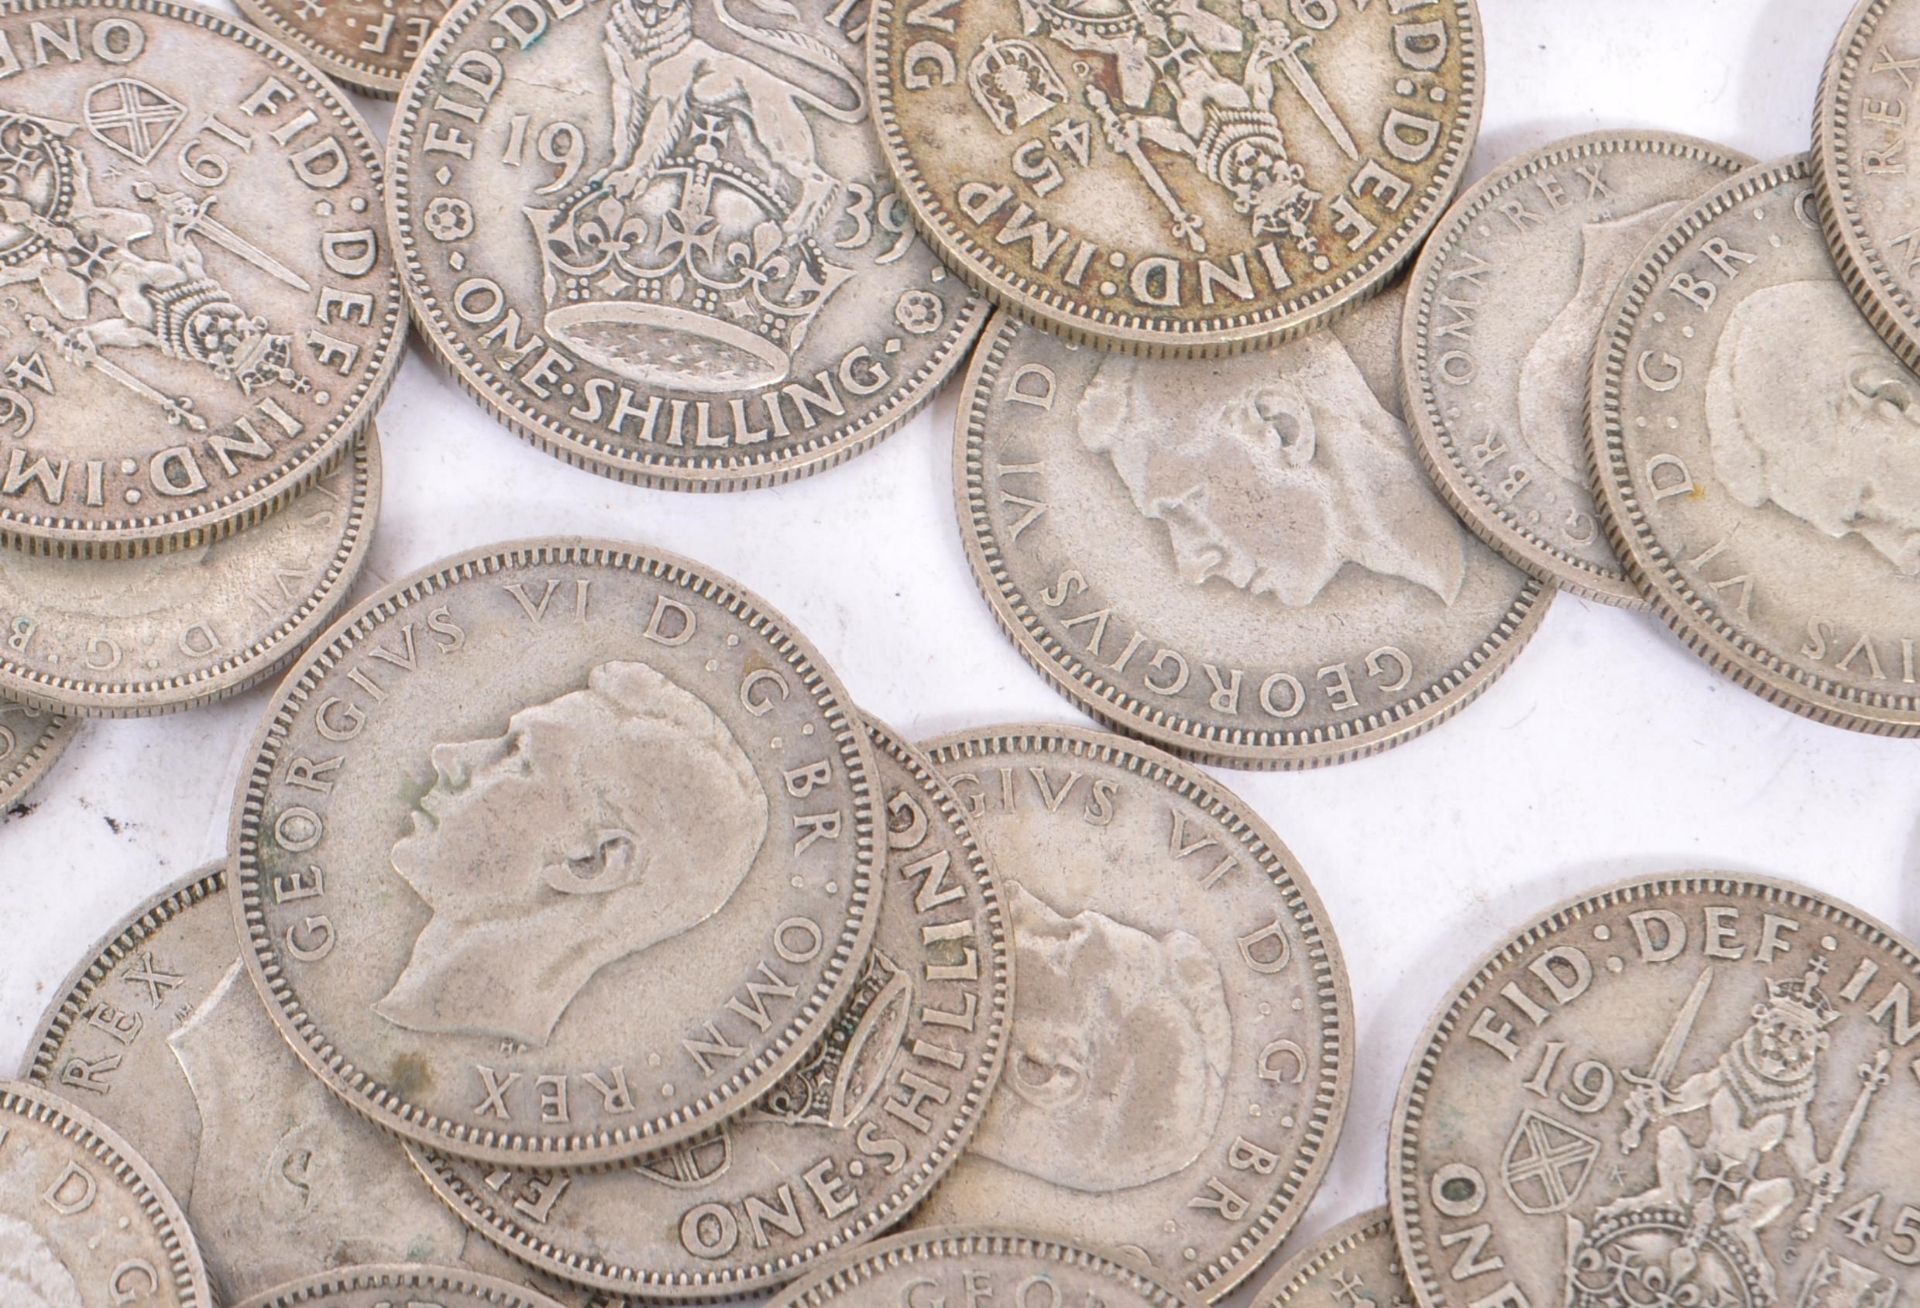 COLLECTION PRE 1946 BRITISH SIXPENCE & SHILLING COINS - Image 7 of 8